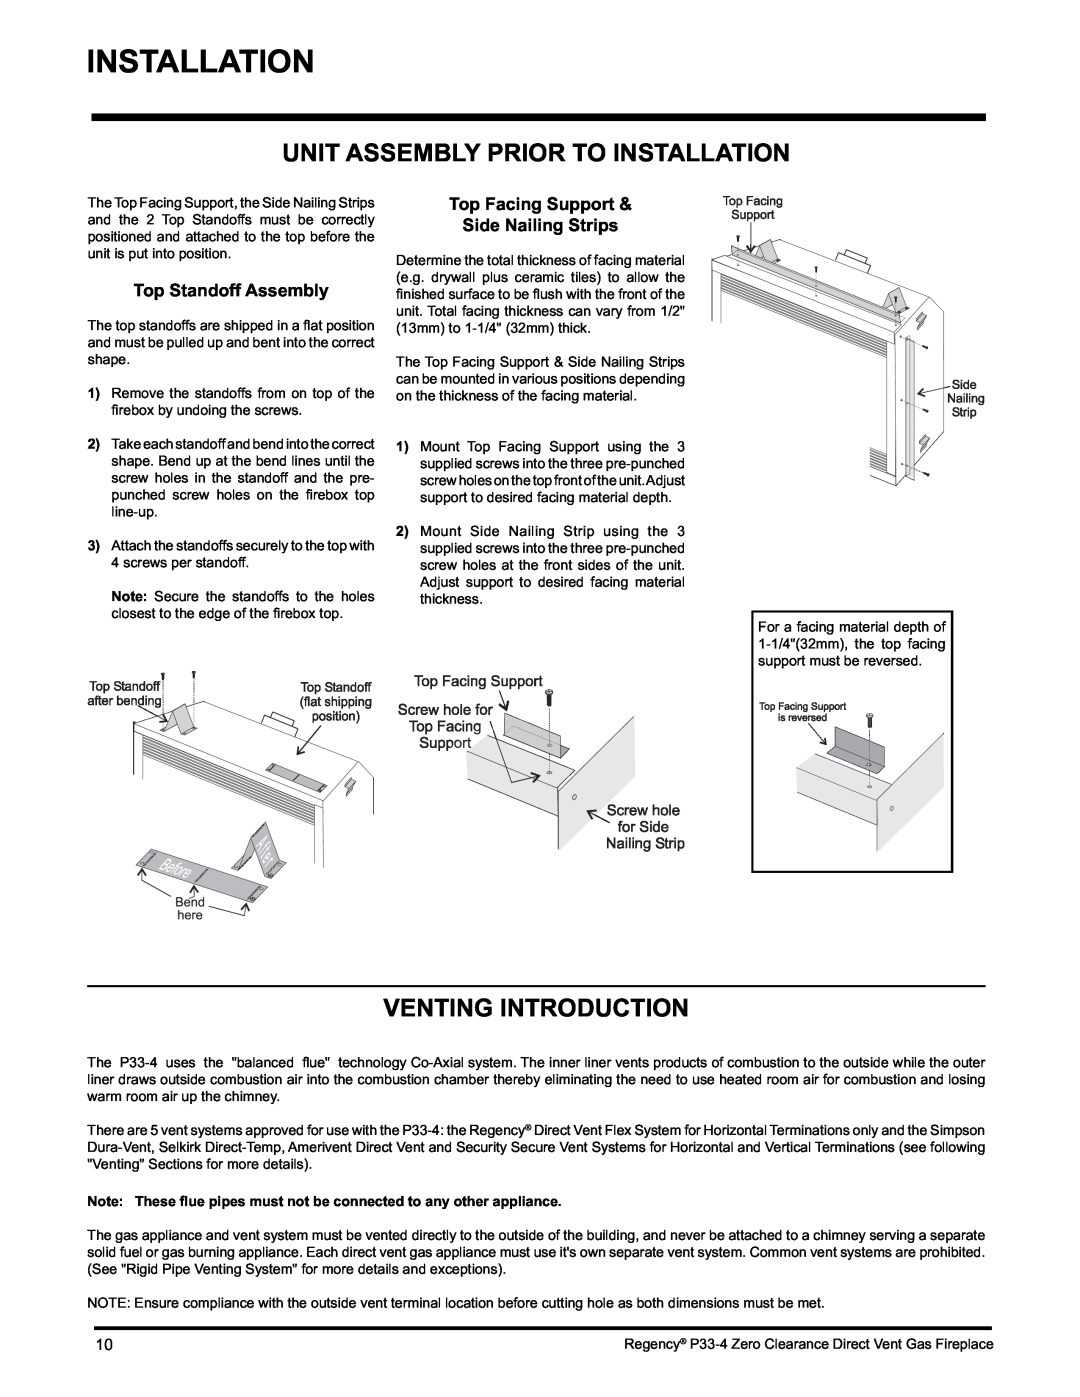 Regency P33-NG4 installation manual Unit Assembly Prior To Installation, Venting Introduction, Top Standoff Assembly 